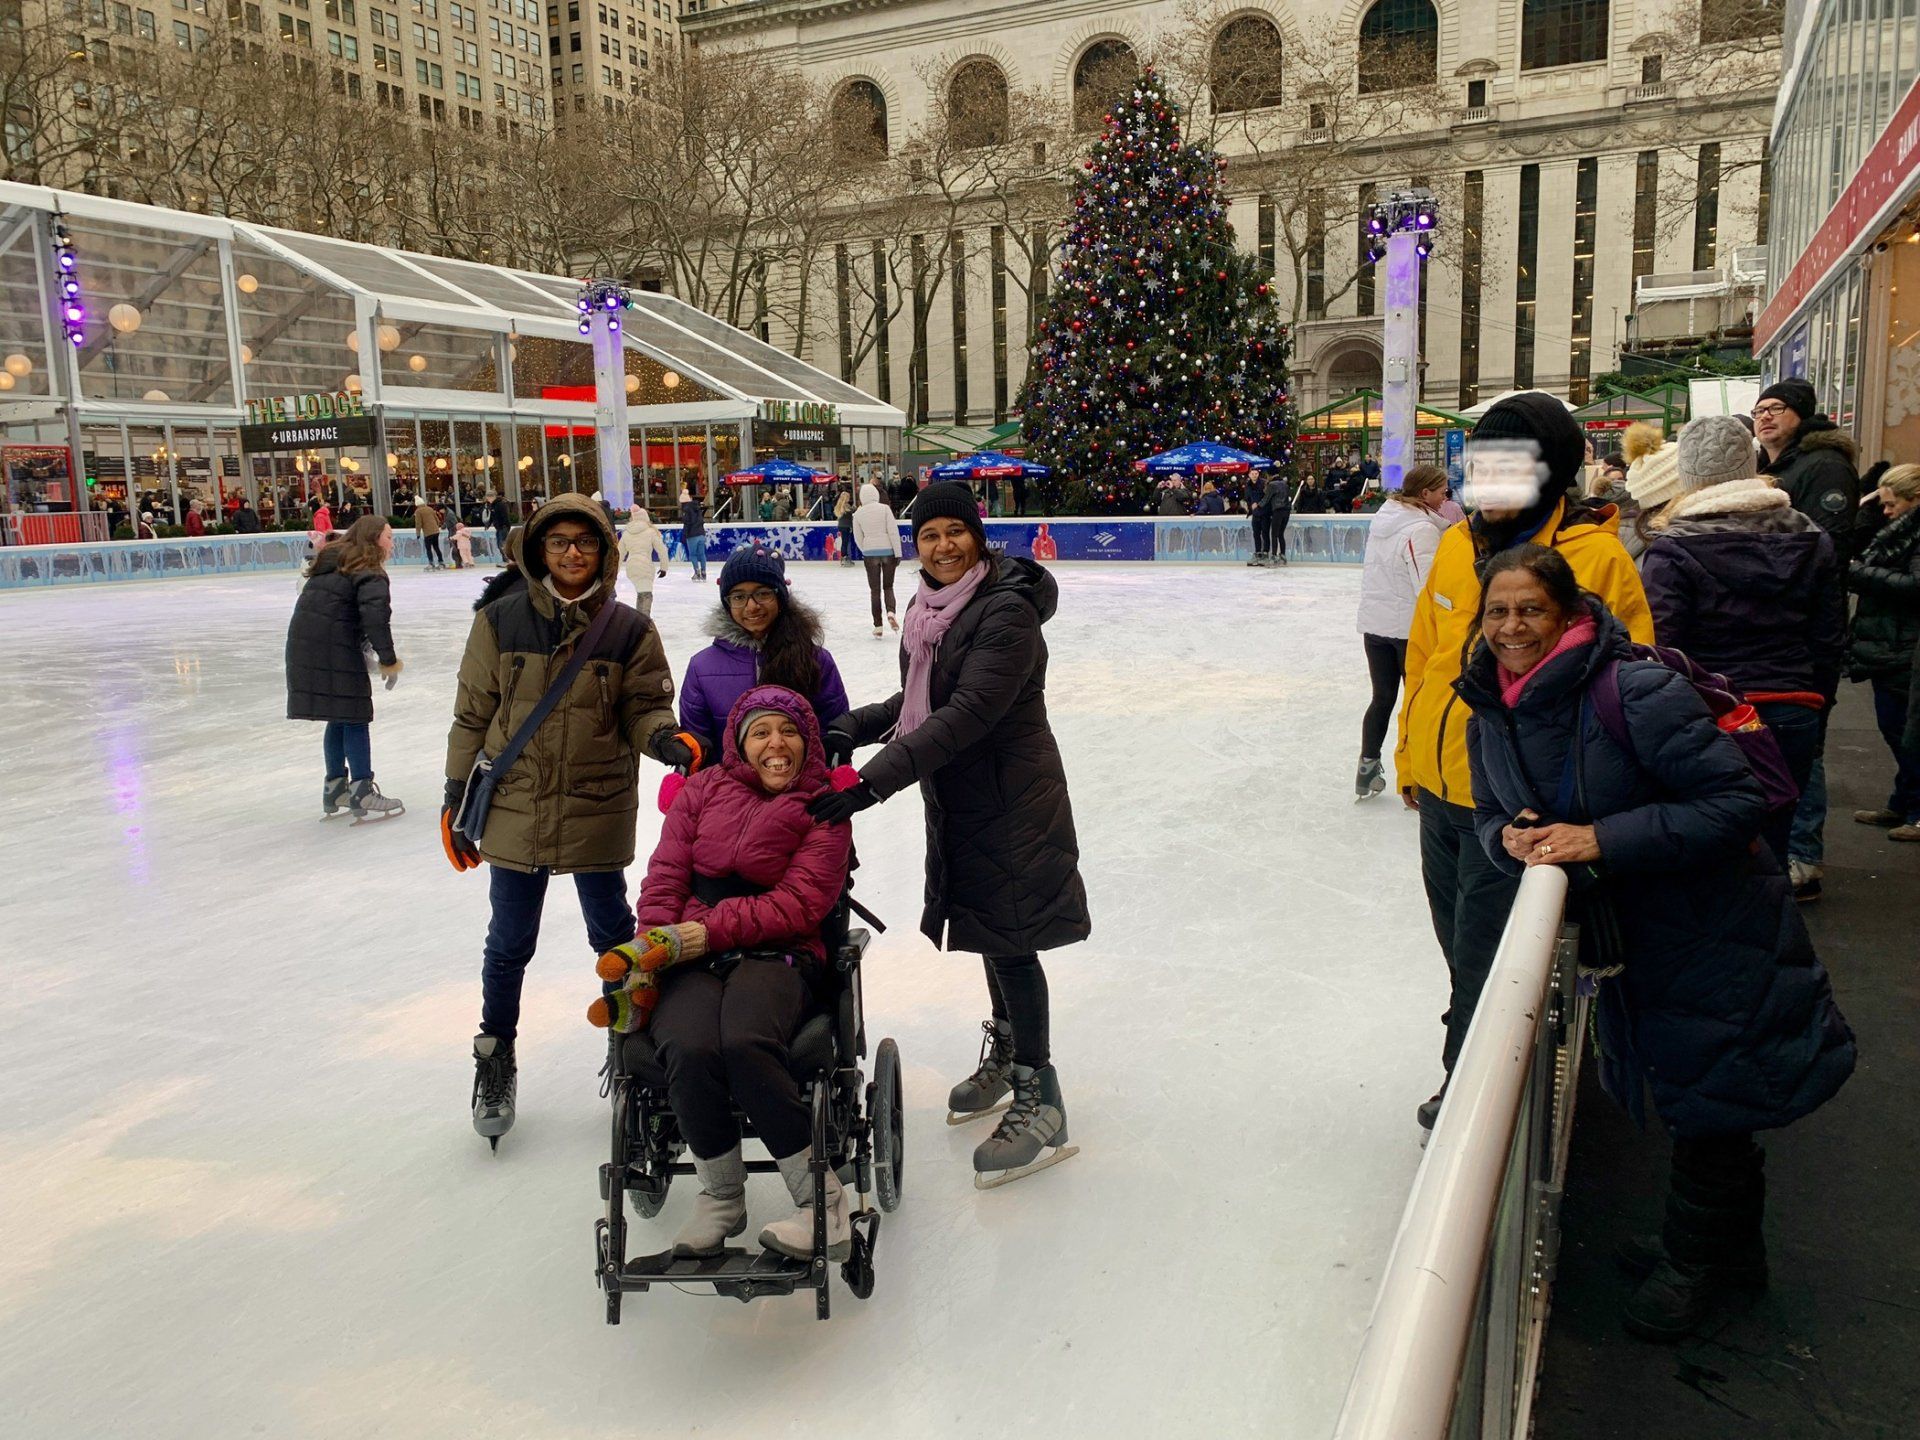 It's a festive scenery with the glass enclosed Lodge foodcourt in the background as well as the famous Christmas Tree. It was a gloomy morning which makes it look like early evening.  Wheelchair accessible activities in New York City is the best.